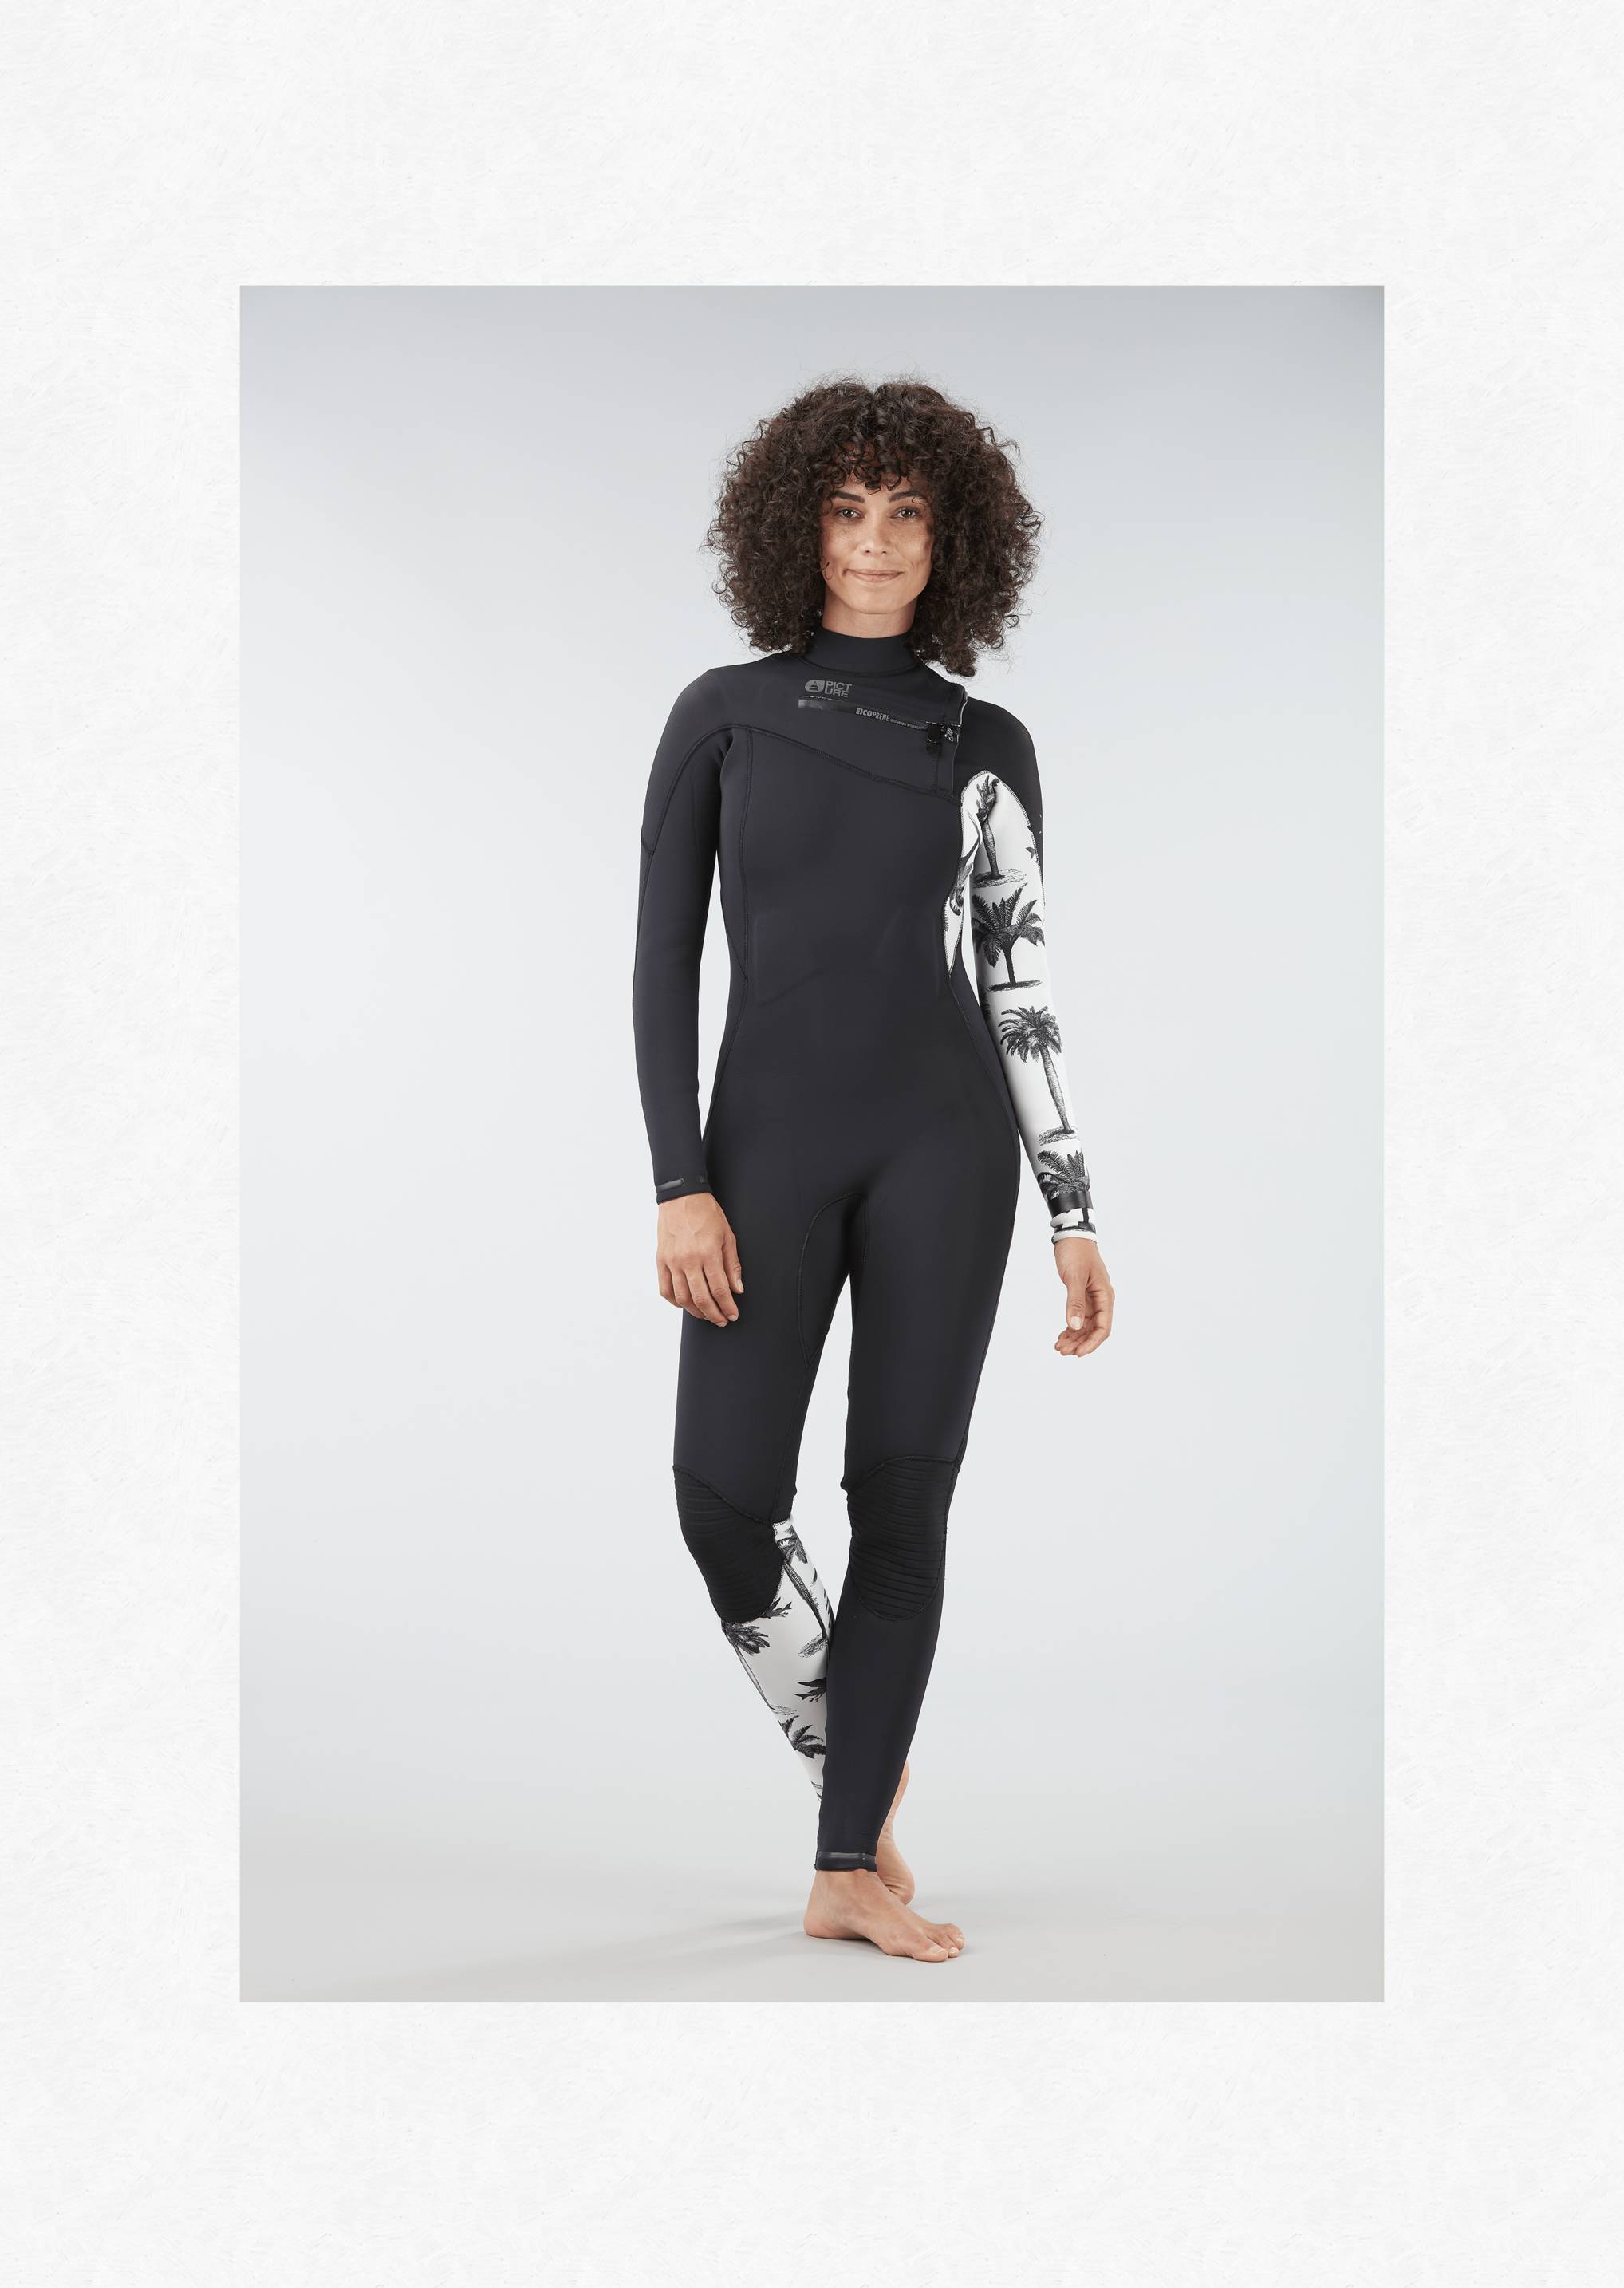 MILADY WETSUIT - Women's Wetsuits  Lore of the sea - Lore of the Sea